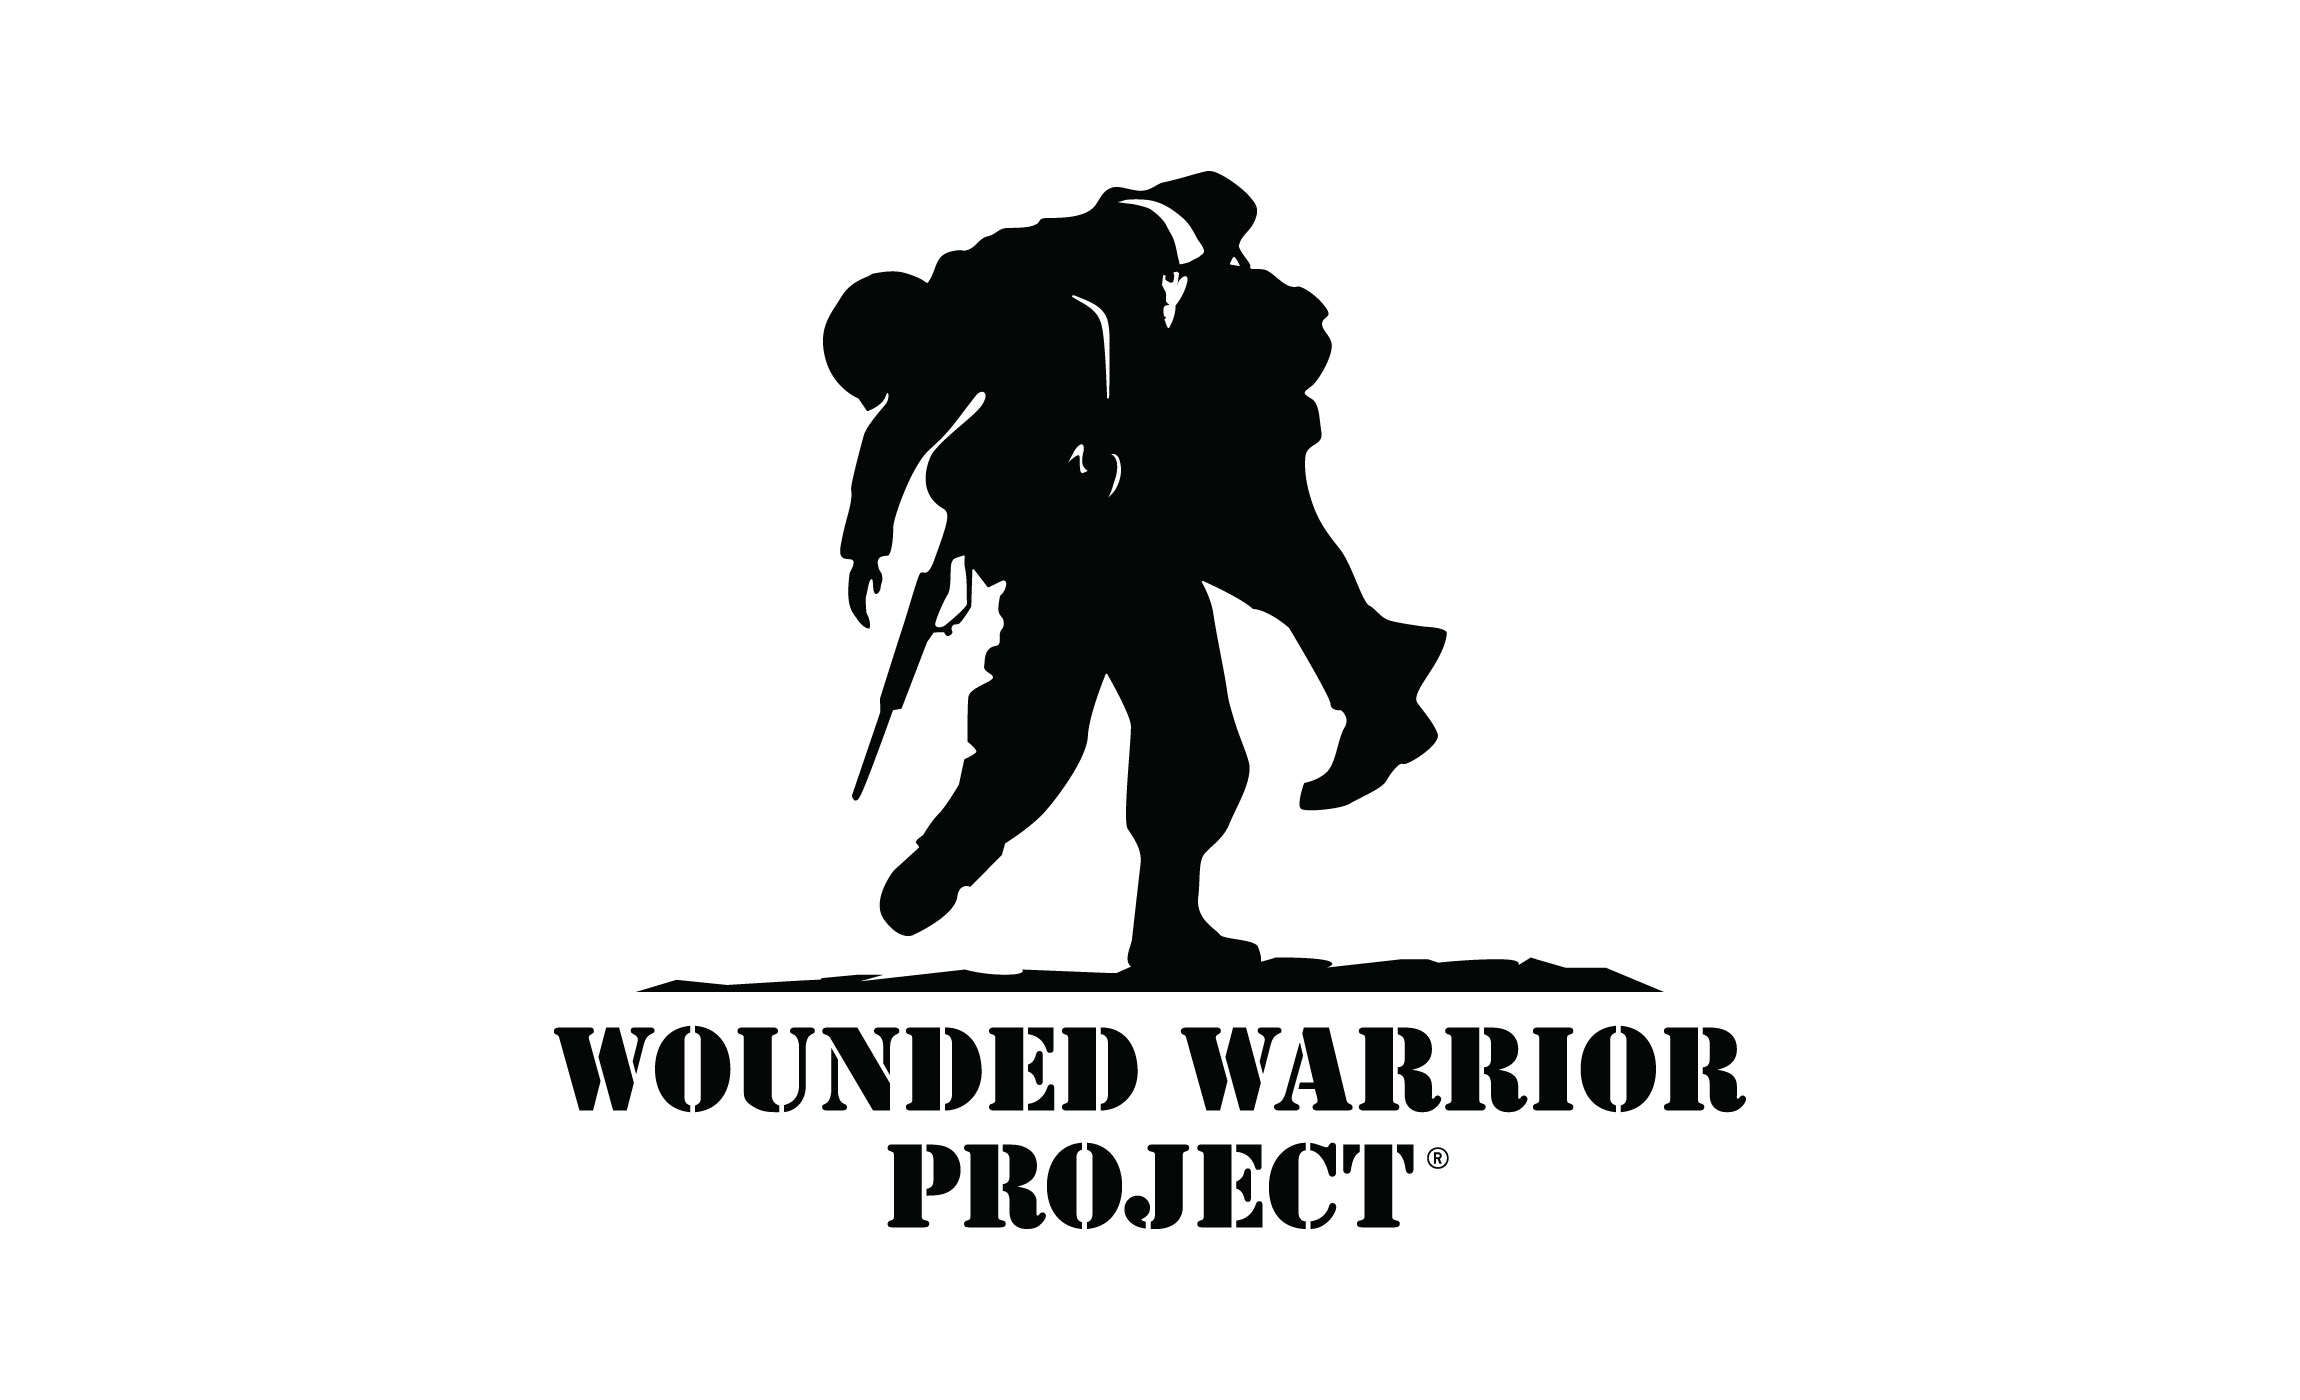 Wounded Warrior Project (WWP) logo